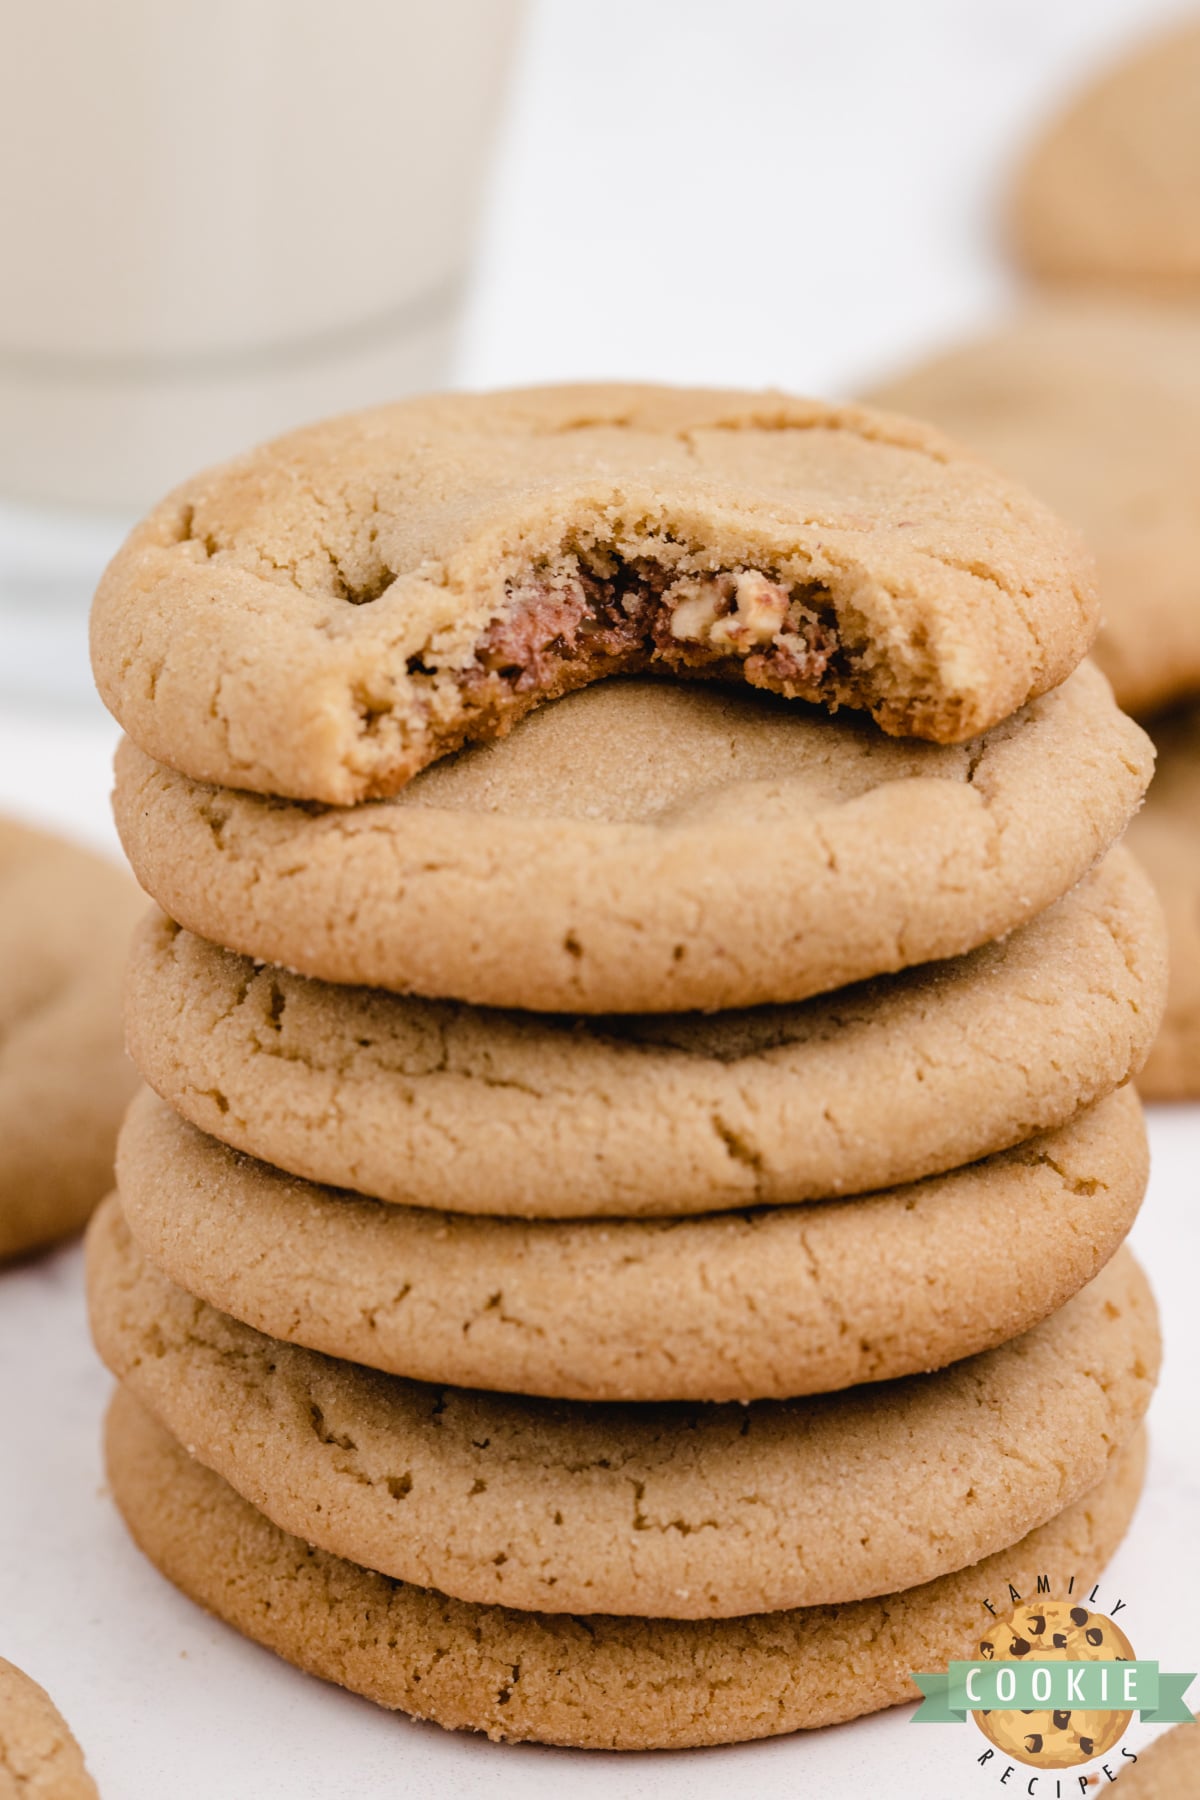 Snickers Peanut Butter Cookies start with an incredible soft and delicious peanut butter cookie recipe, and add a Snickers surprise in the middle!